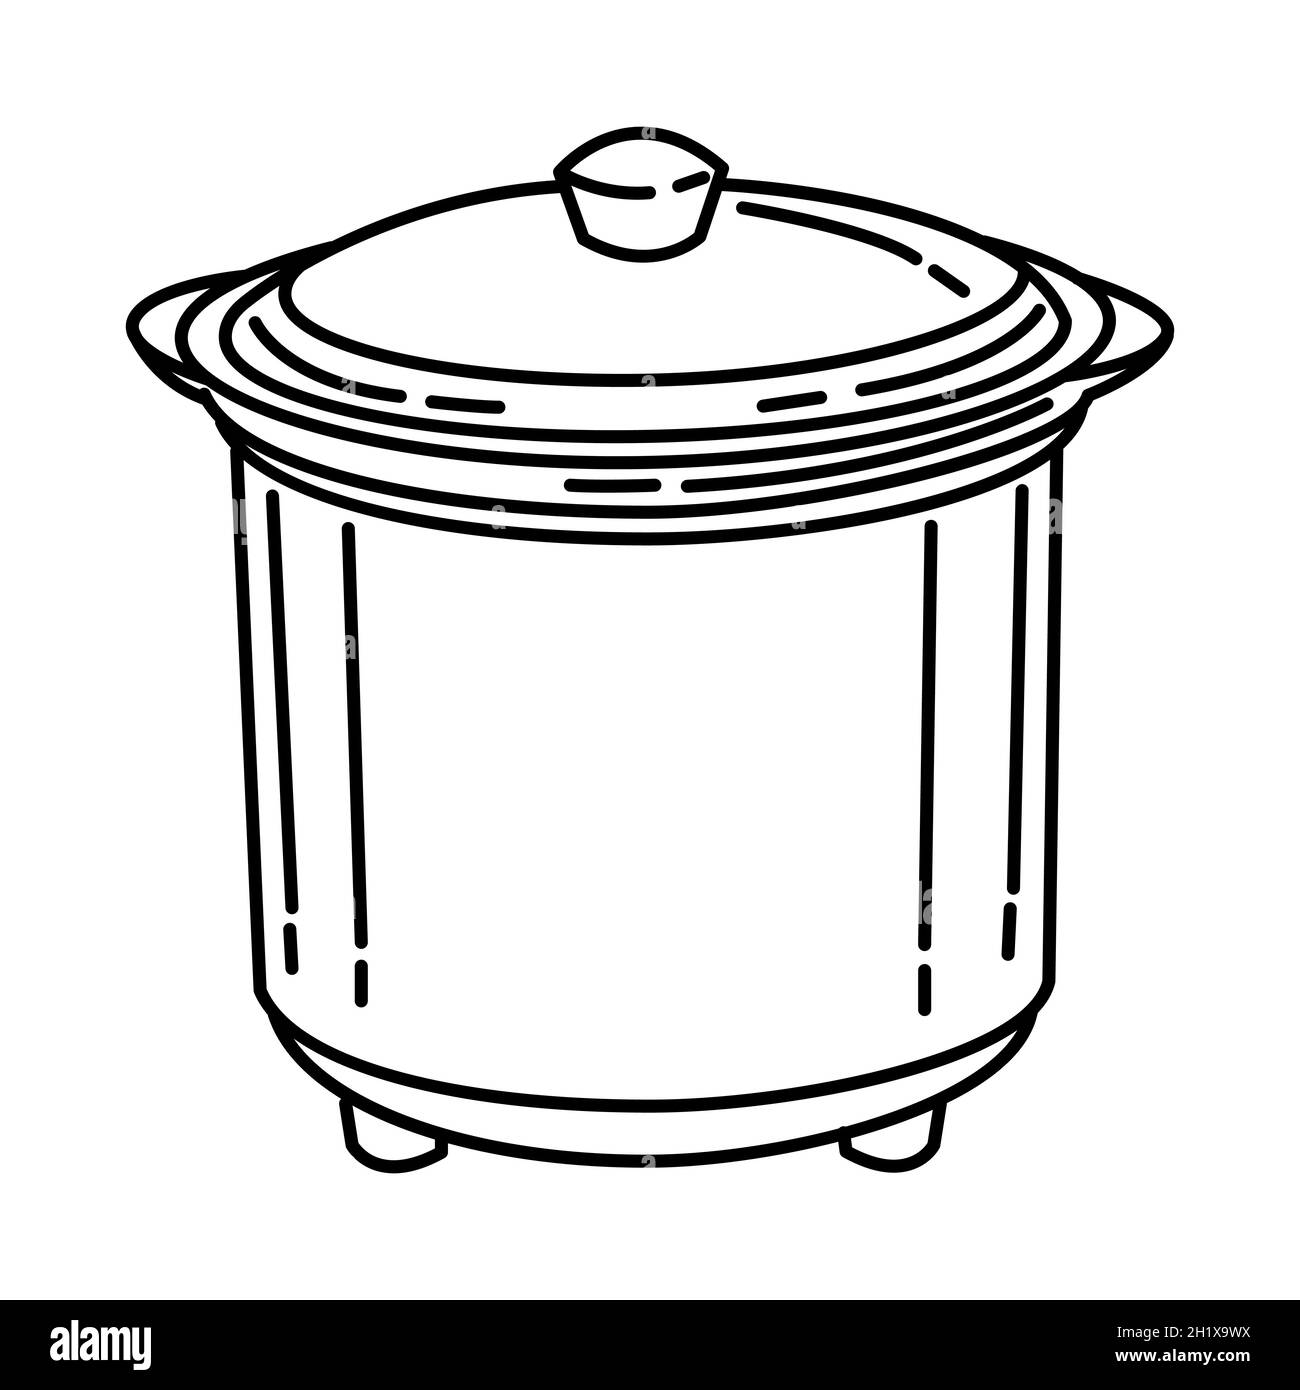 Crockery Cooker Part of Cooking Accessories and Equipment Device Hand Drawn Icon Set Vector. Stock Vector